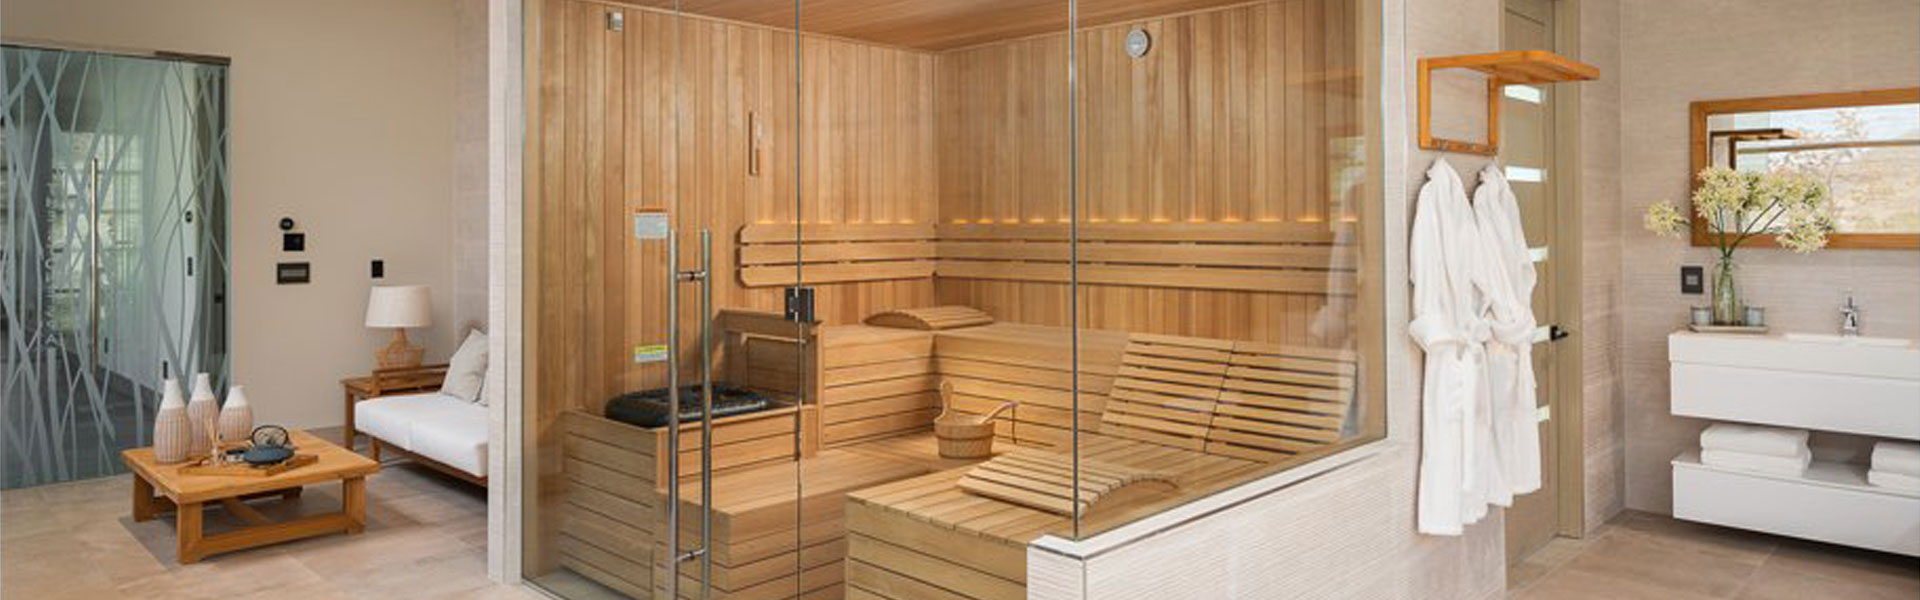 Sauna Brings Wellness & Relaxation to Luxury Home Spa